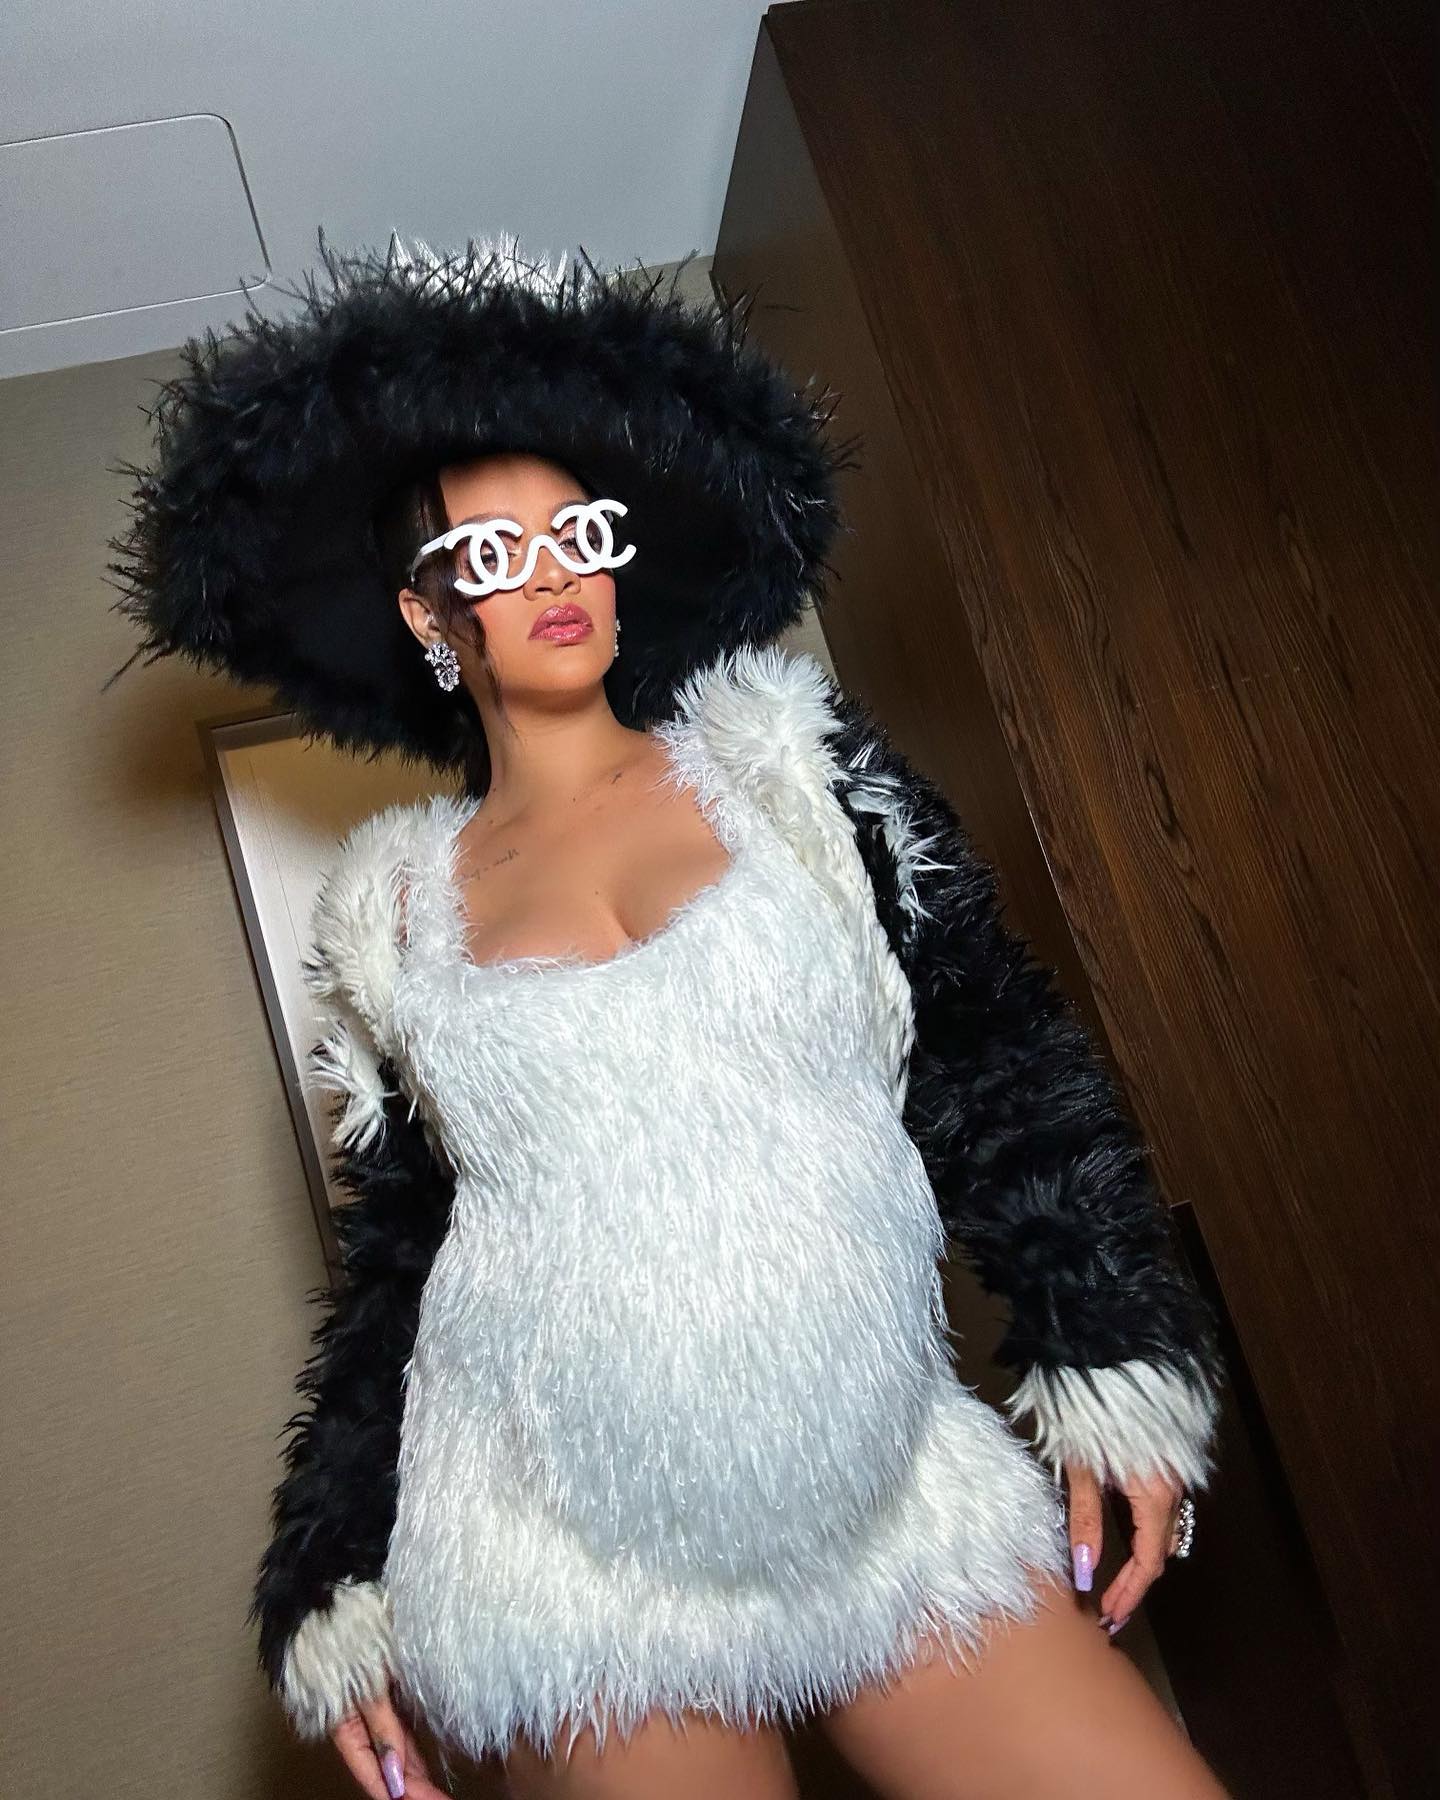 Rihanna in a pre met gala mood yesterday wearing a fur coat & shades from  the chanel fall 1994 collection 🤍